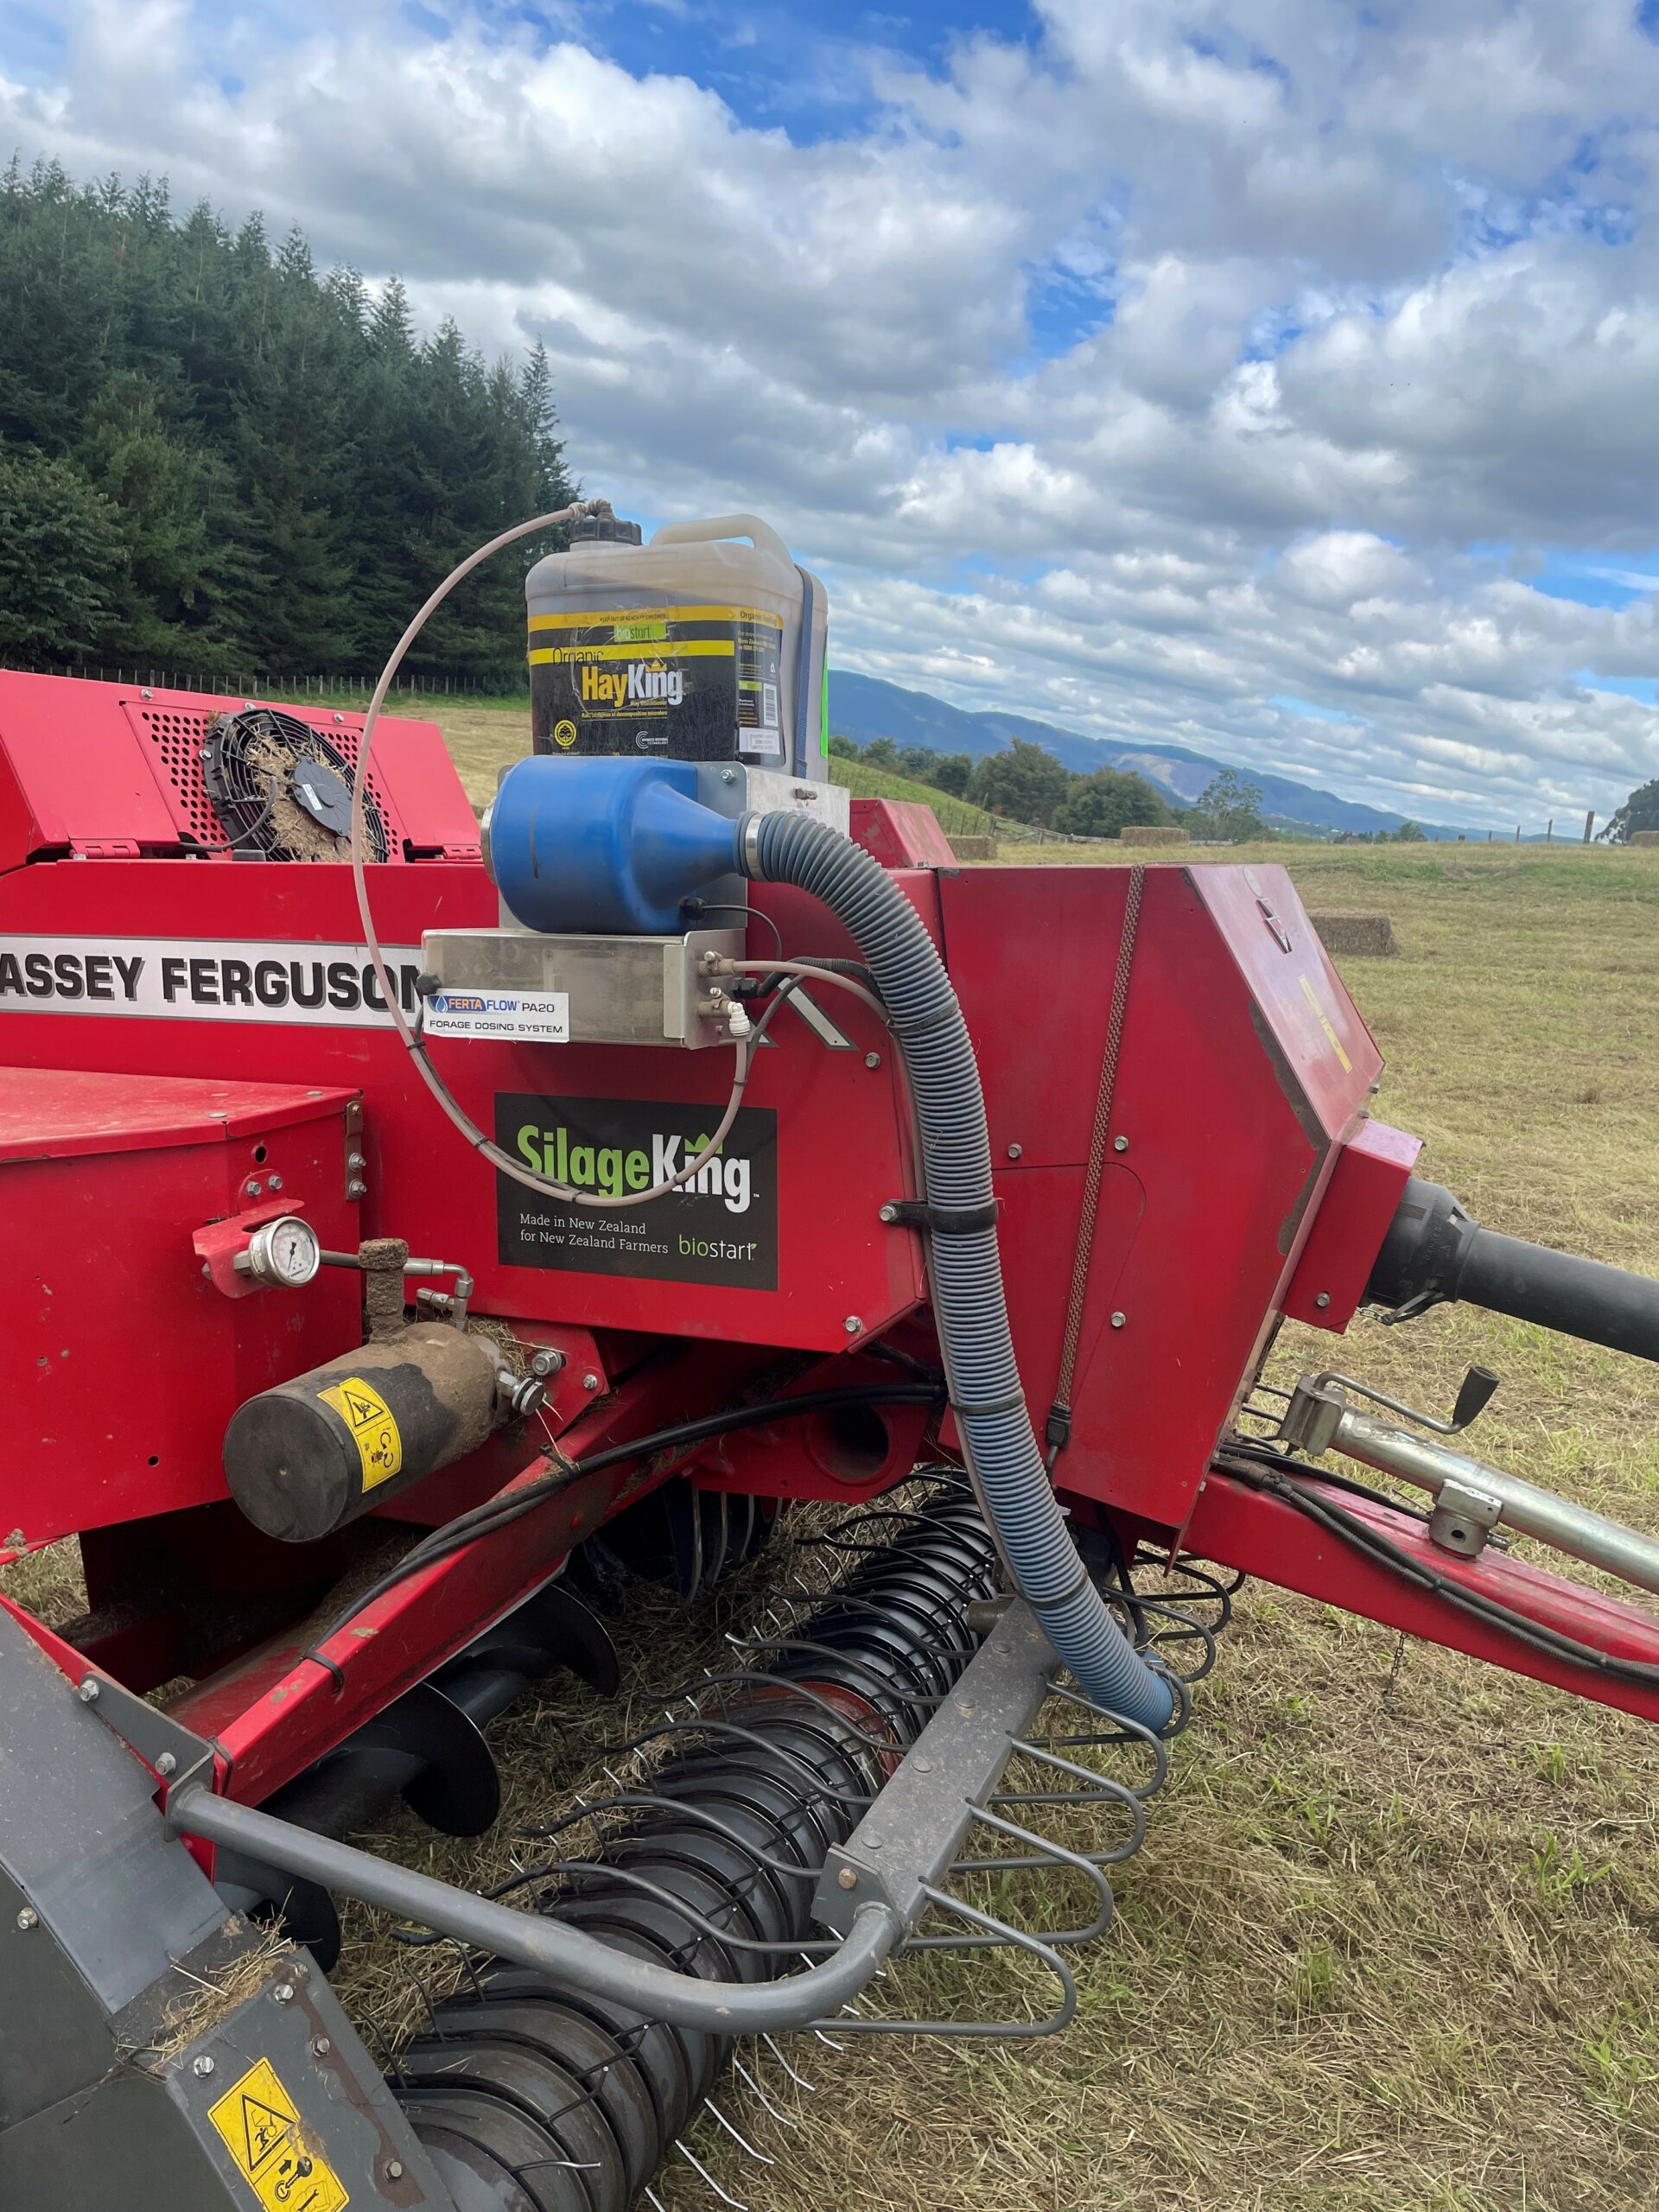 This image shows silage-making machinery with a can of SilageKing connected to it.